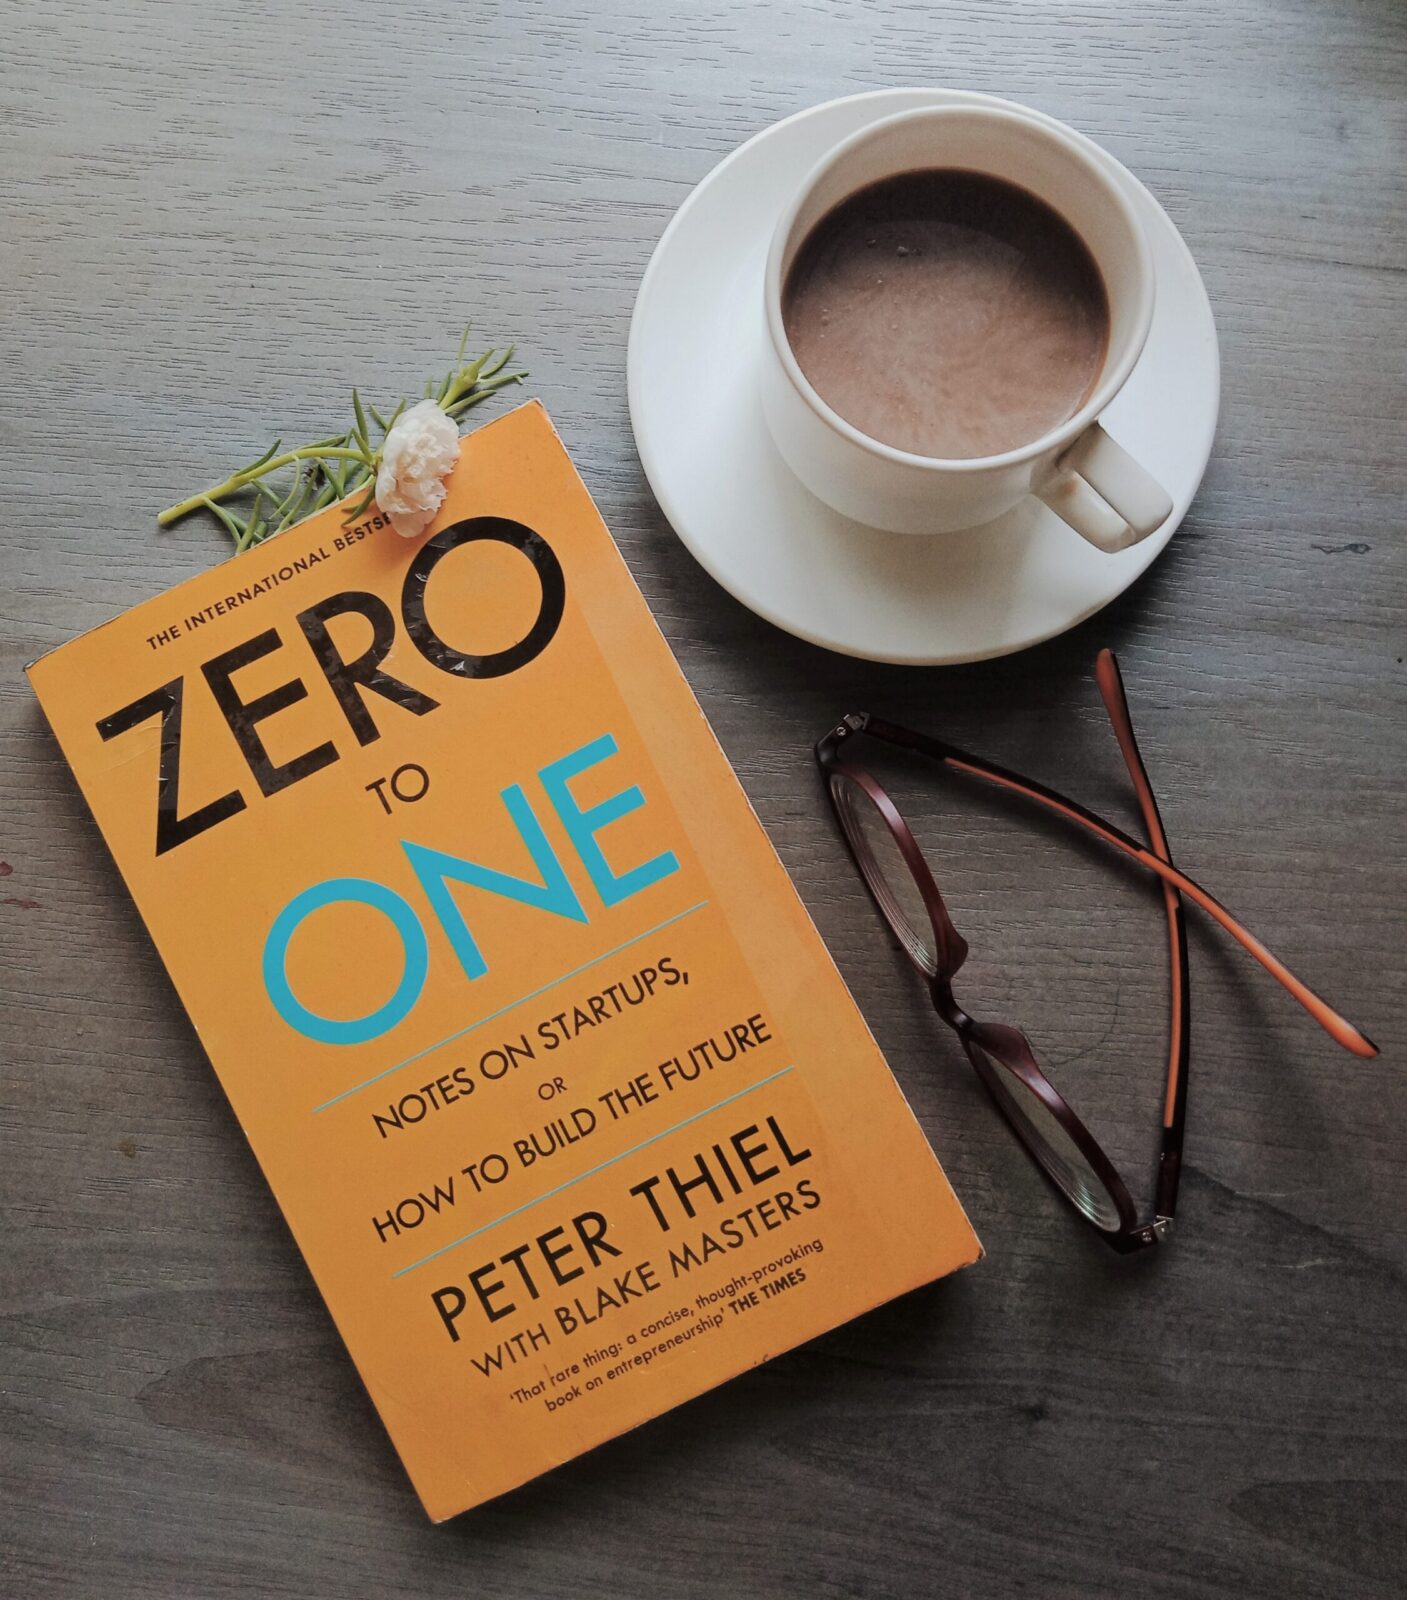 book review of zero to one